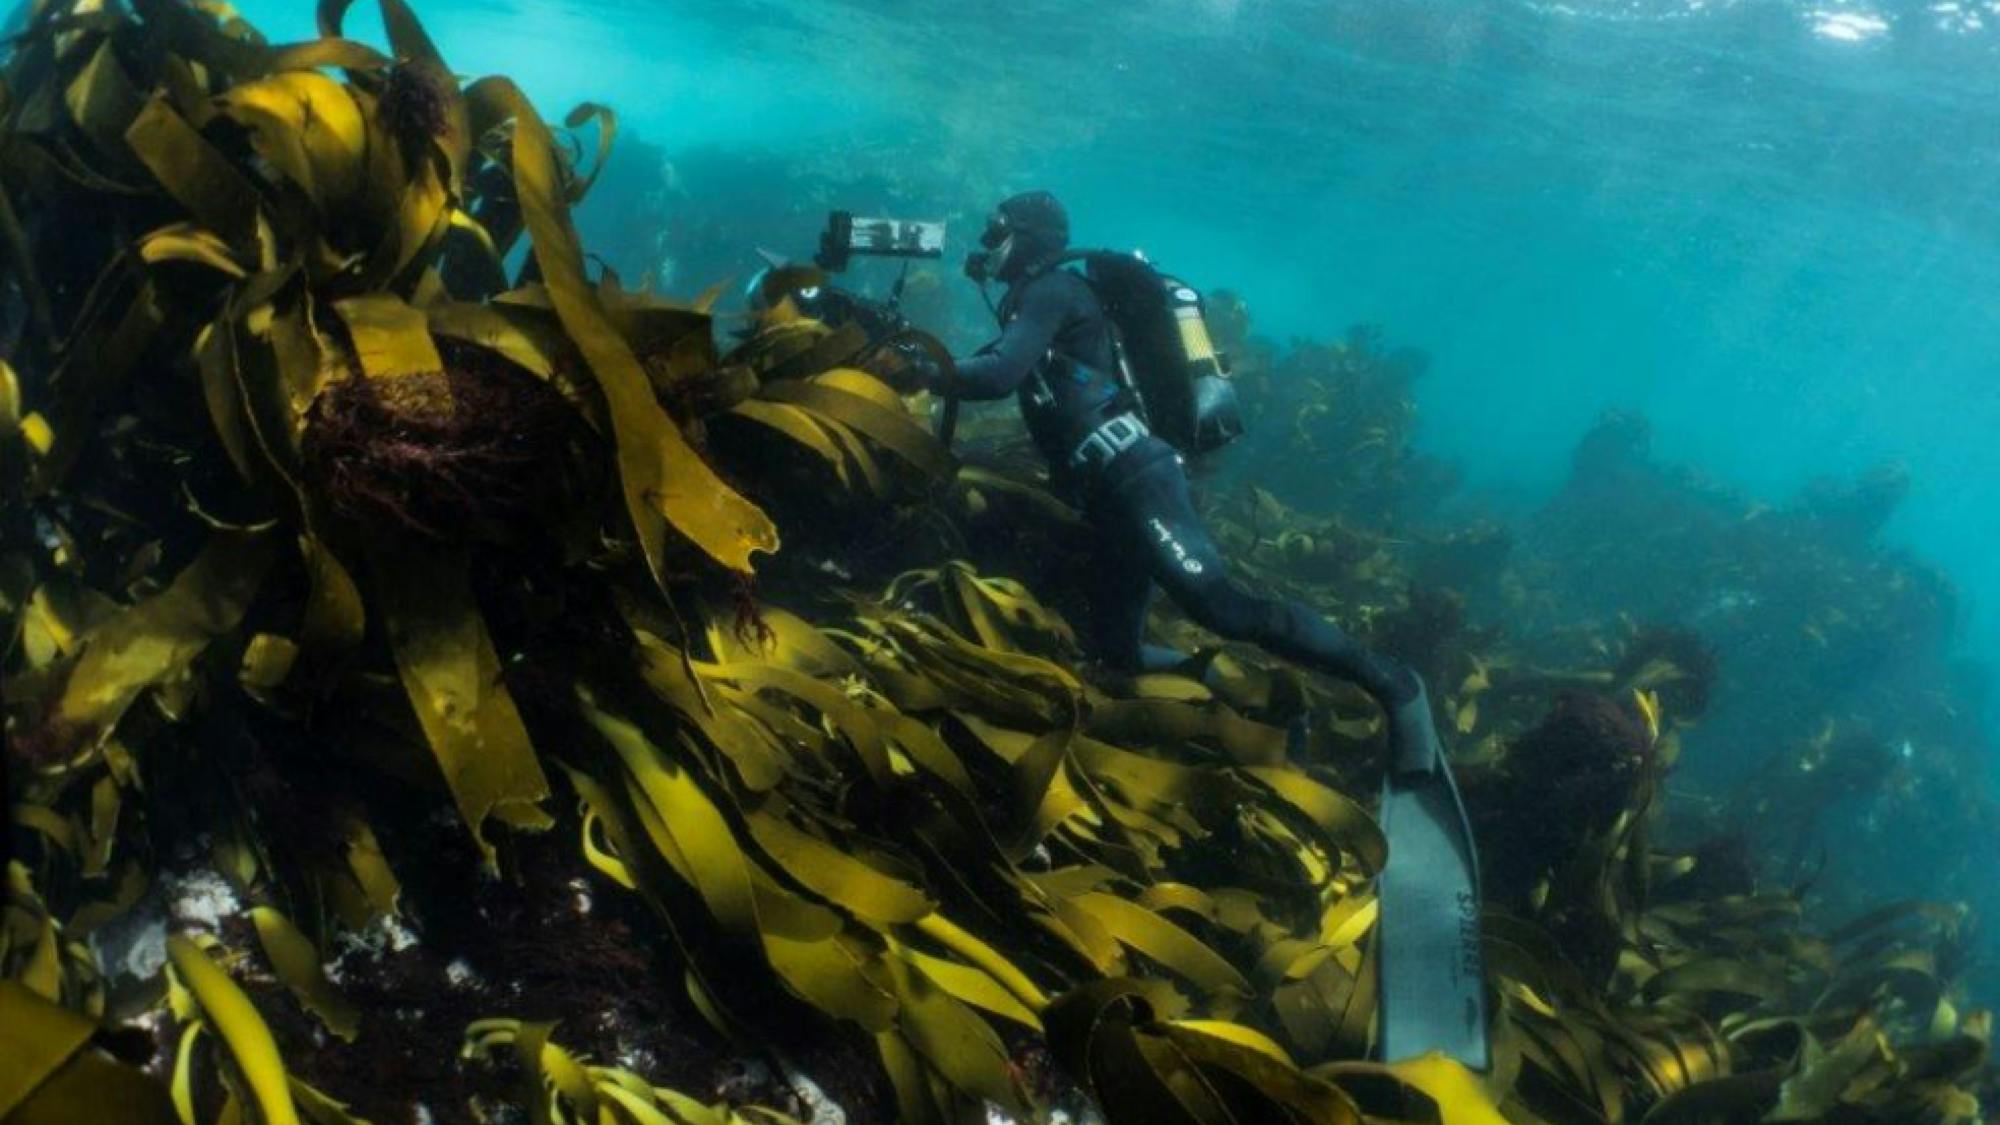 Roger Horrocks films in the kelp forest. Wearing a wetsuit and other assorted diving gear, he almost leans into a large growth of yellow-green kelp.